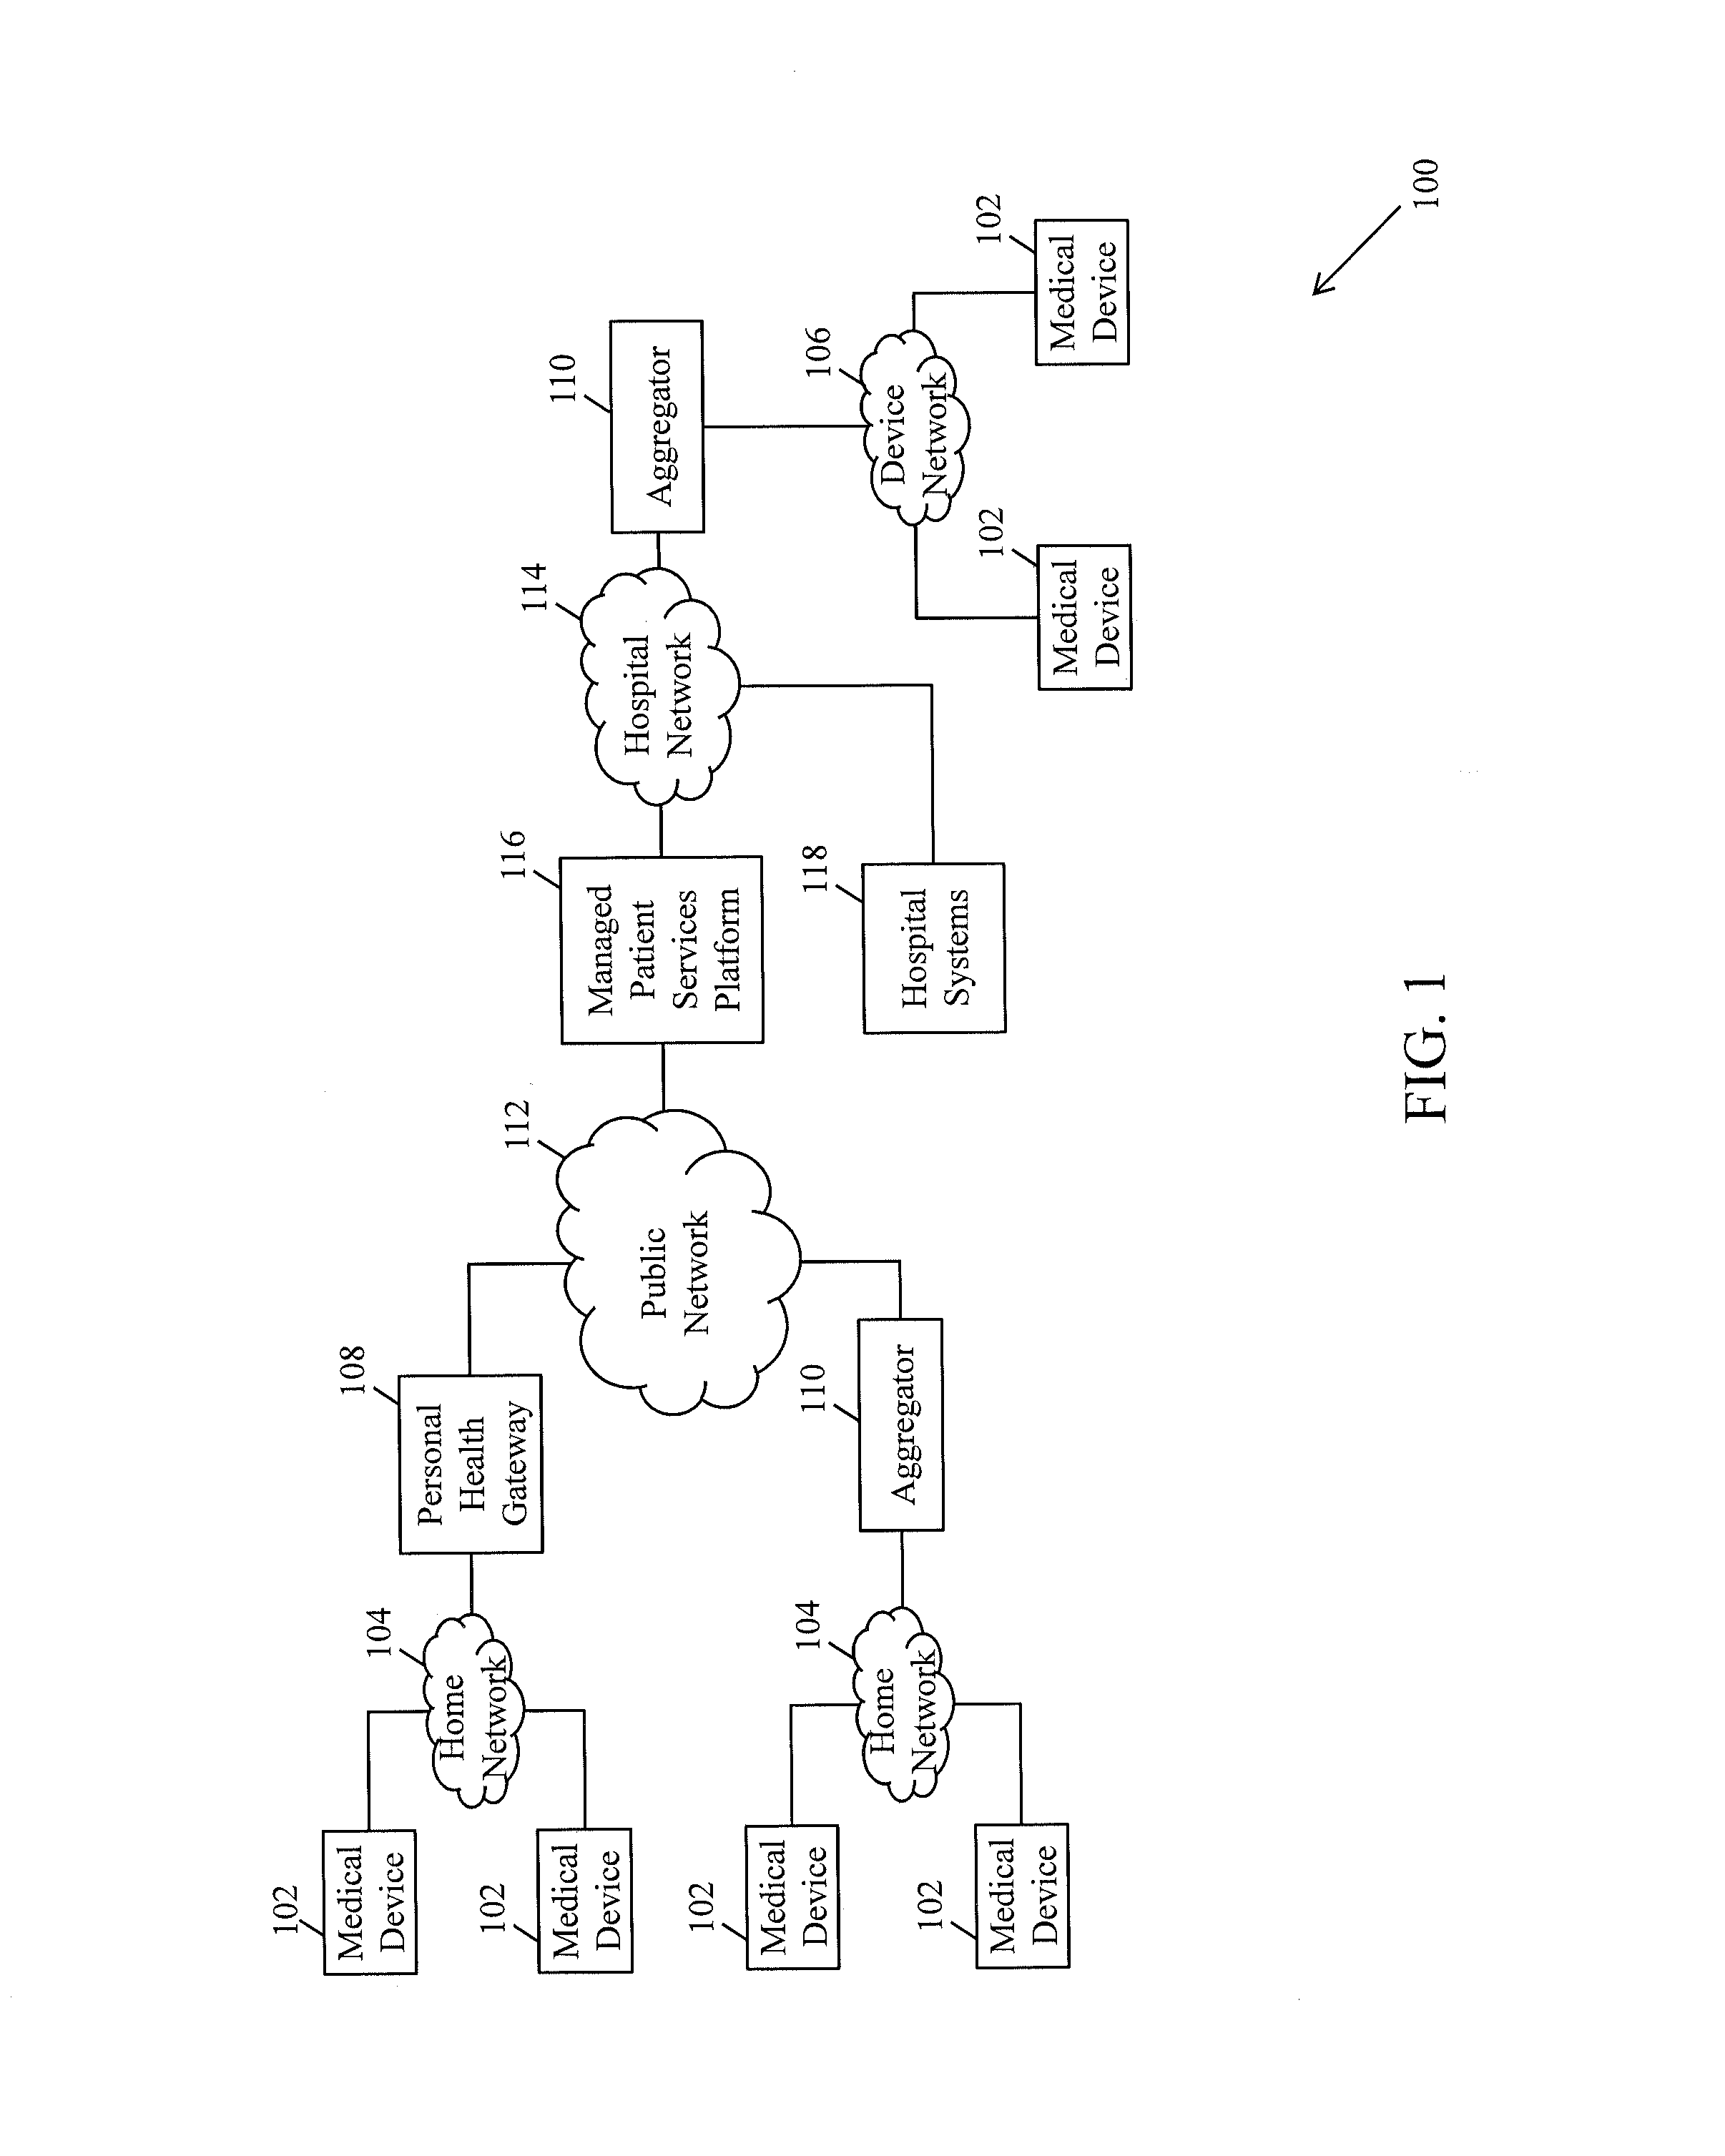 System and method for remote management of medical devices and patients